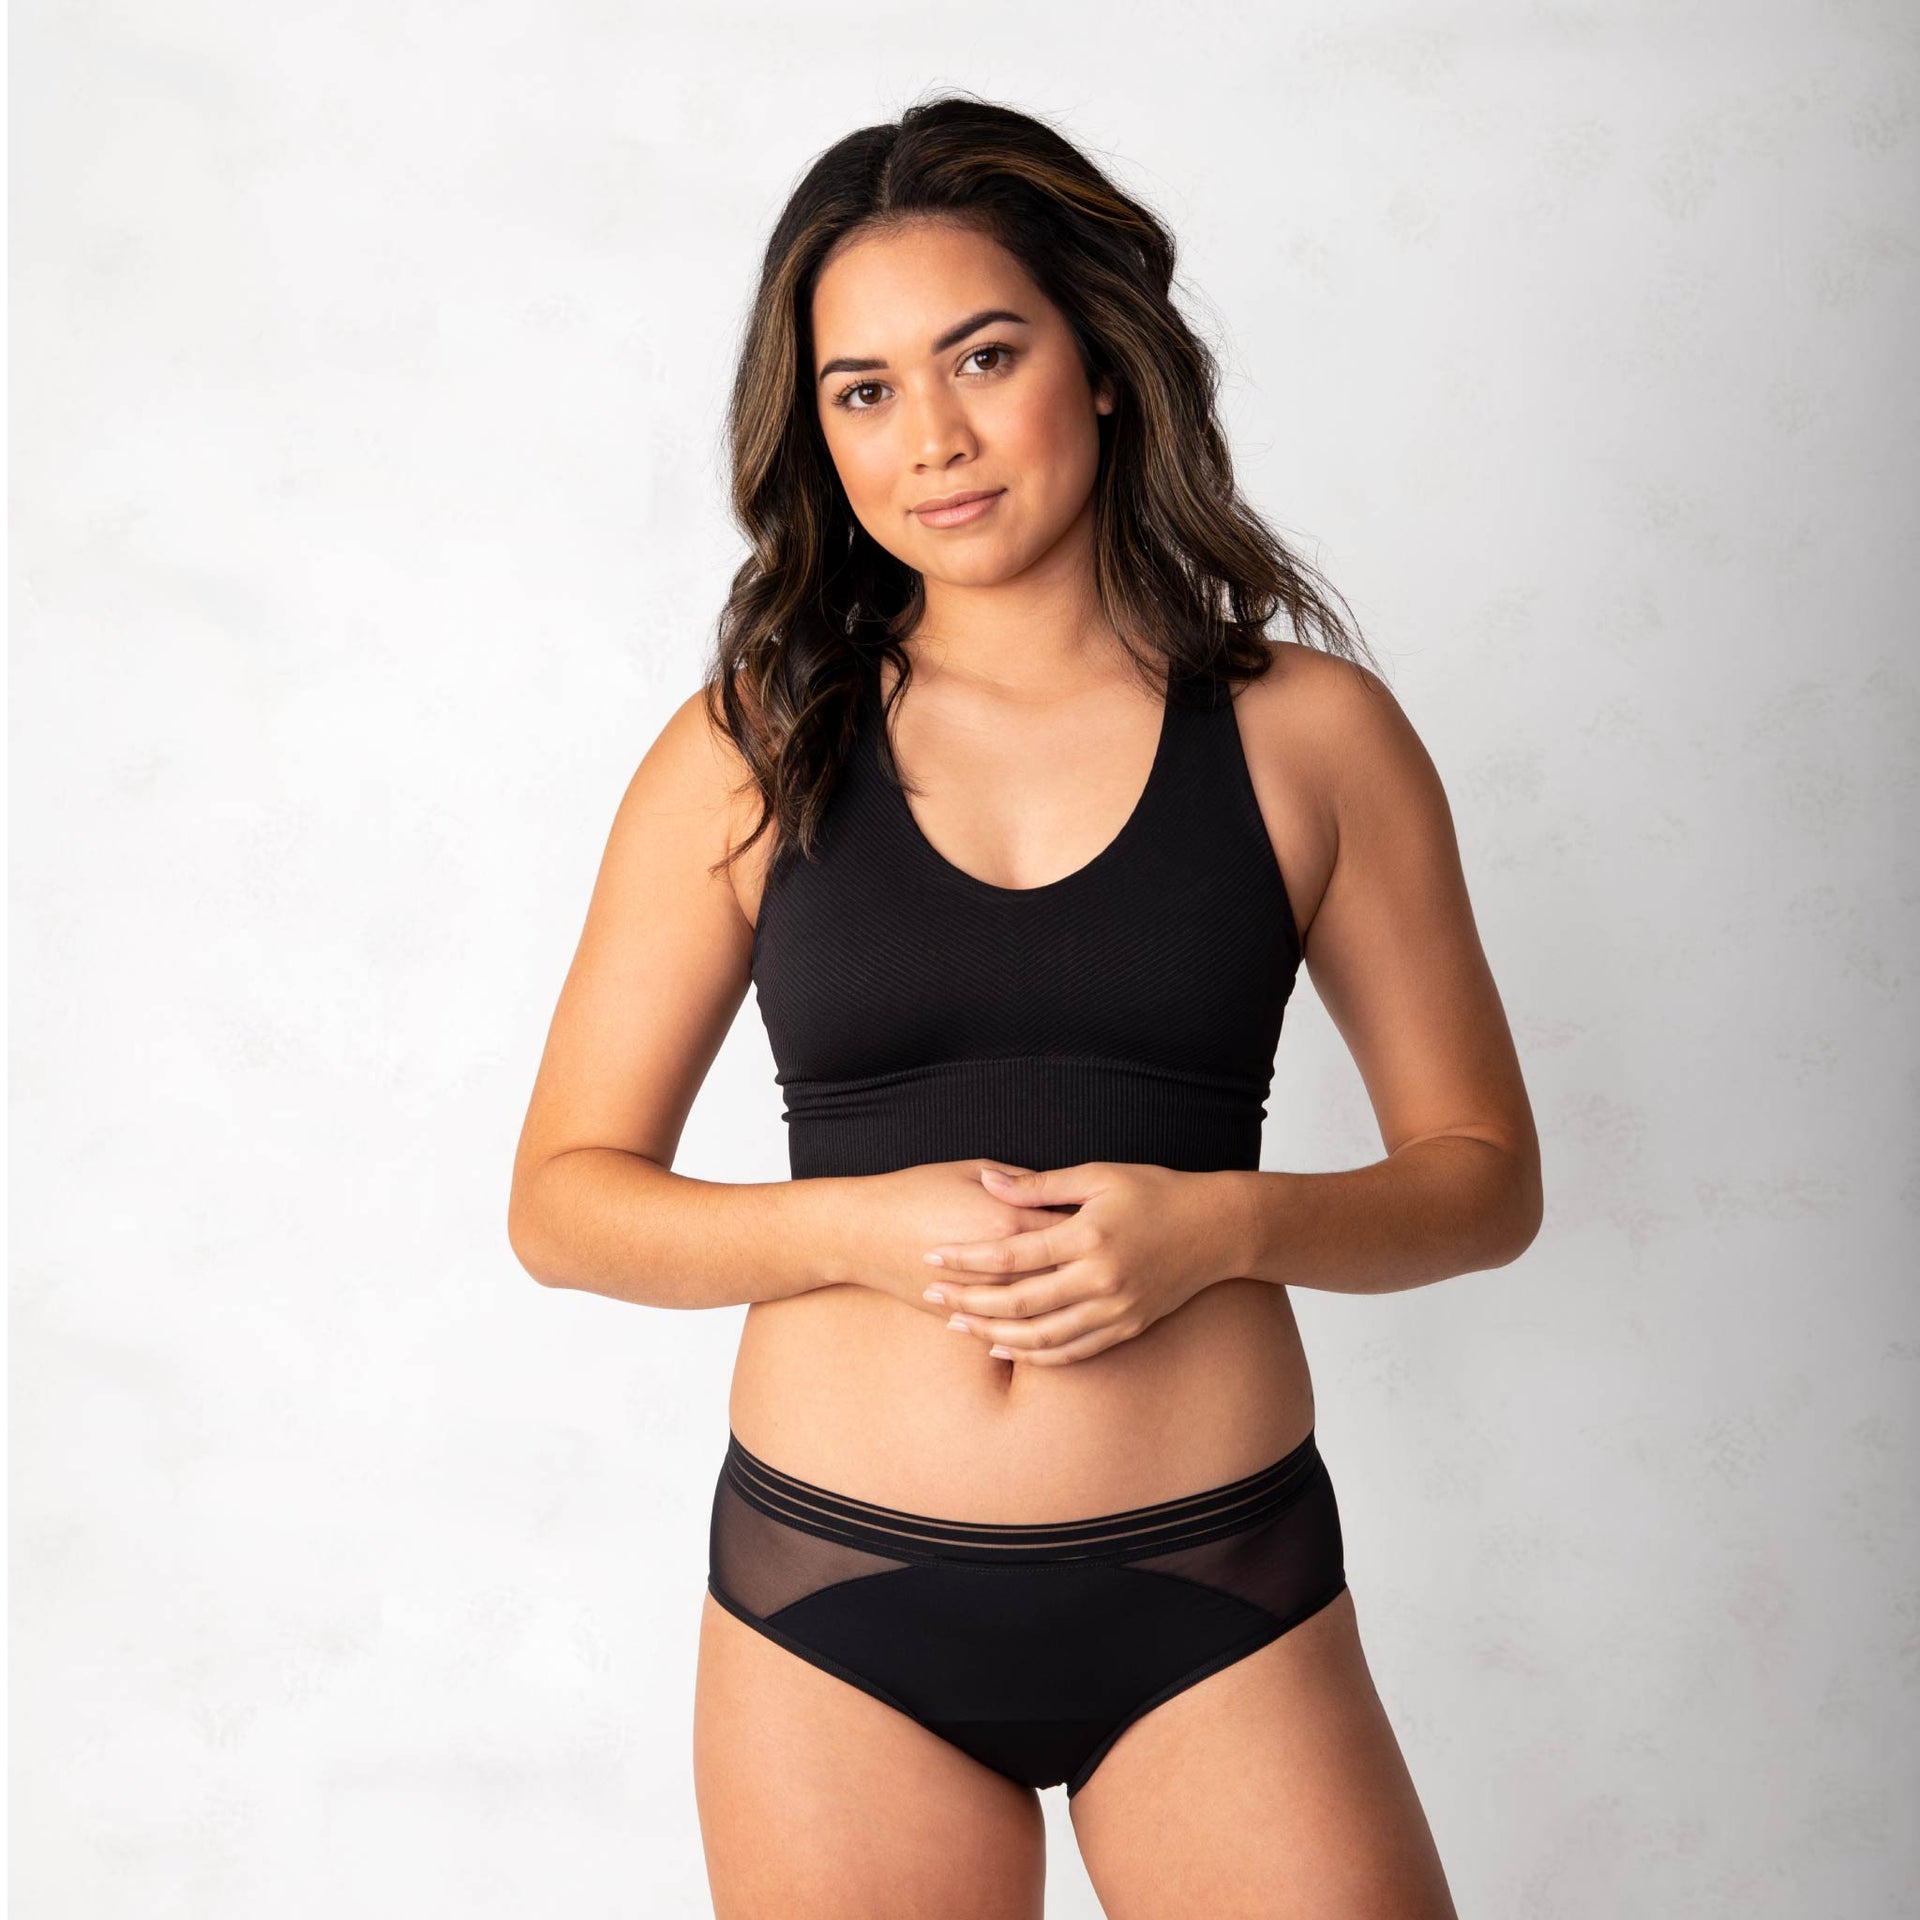 Flo Getter Period Underwear Black, The Oh Collective, S